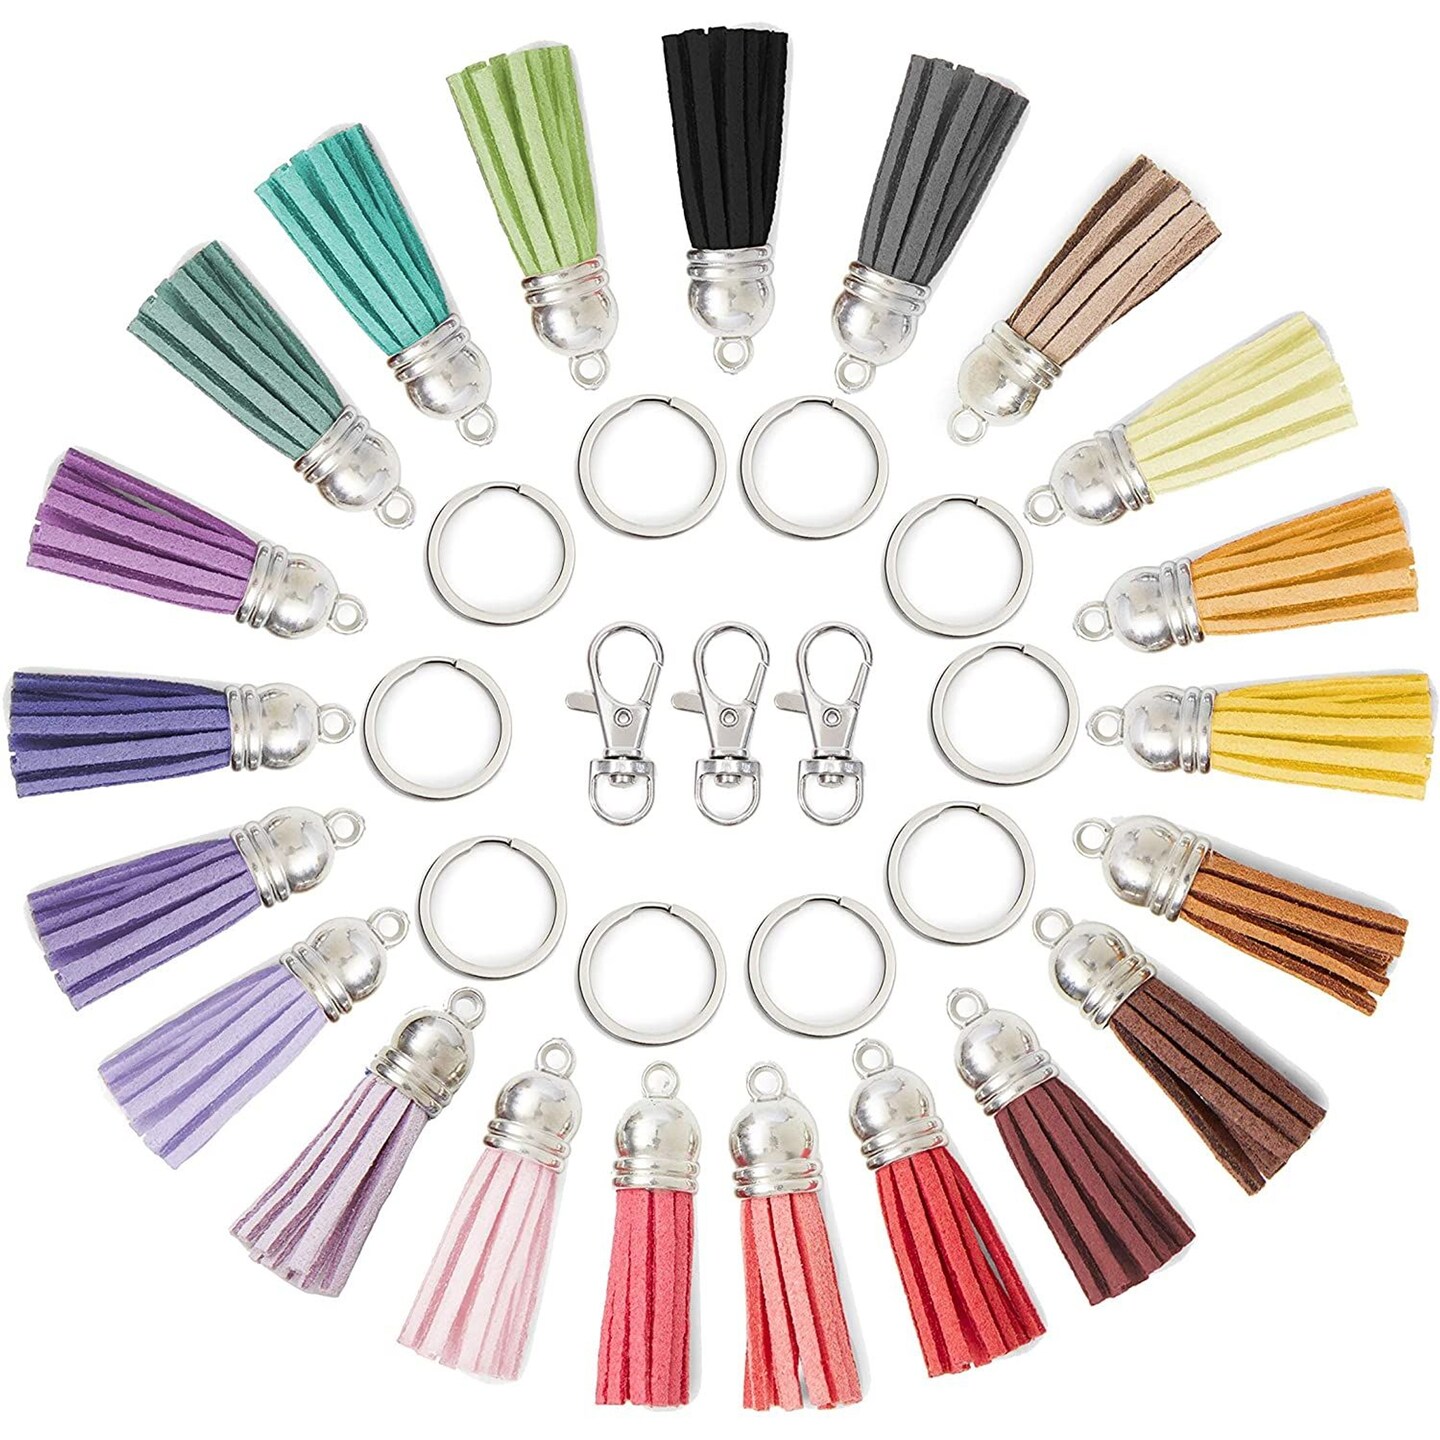 10 pcs Leather Key chain tassels are suitable for arts and crafts